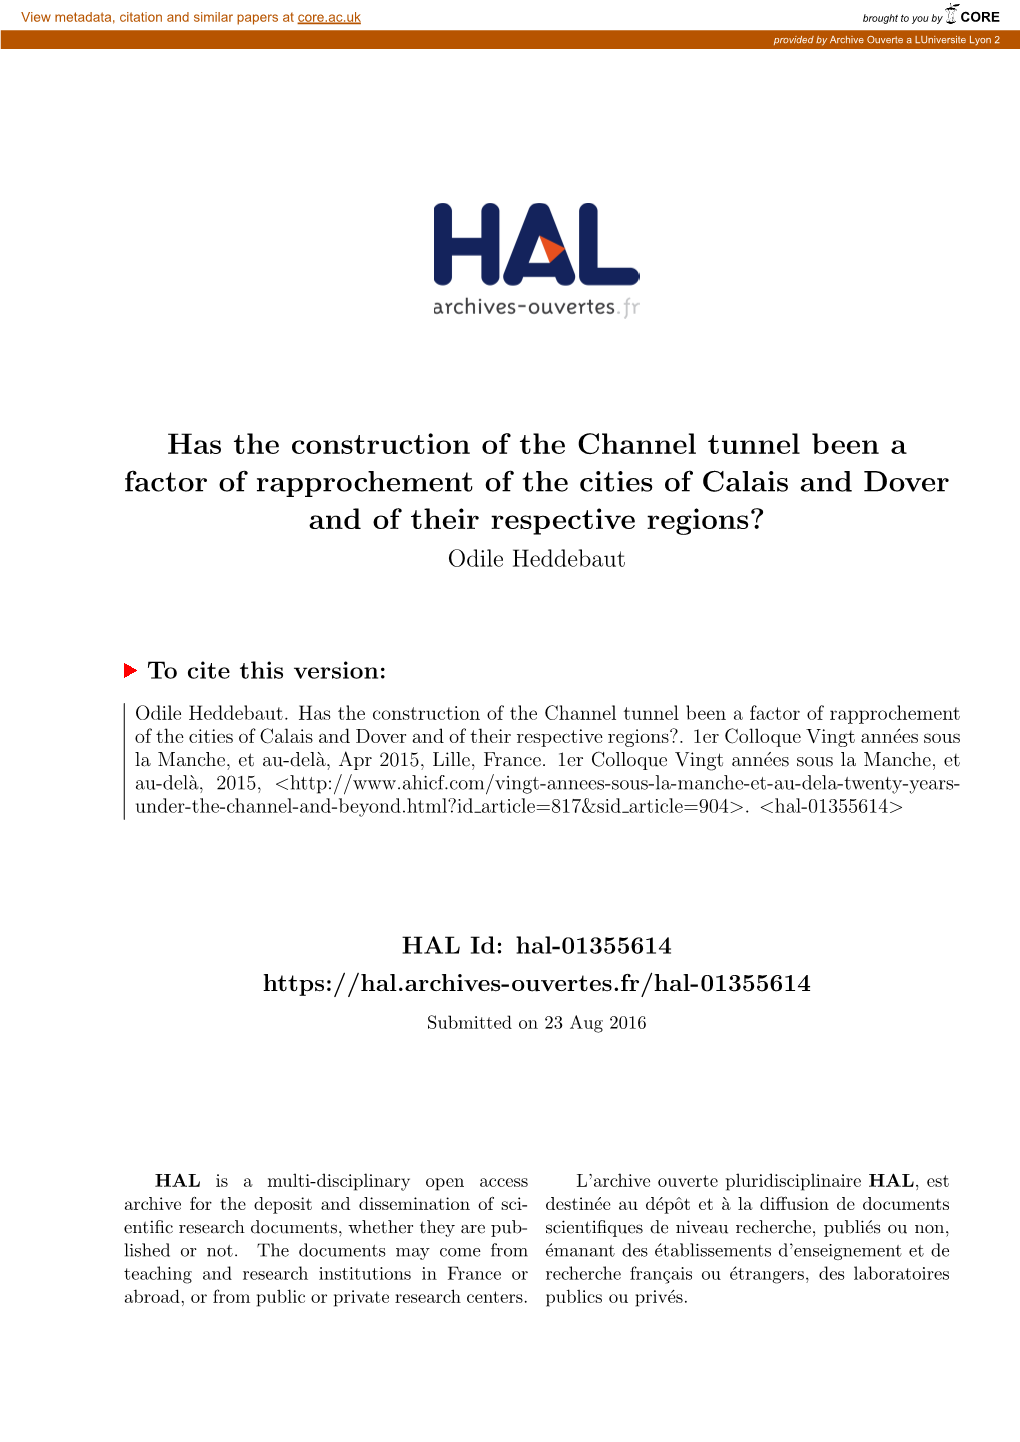 Has the Construction of the Channel Tunnel Been a Factor of Rapprochement of the Cities of Calais and Dover and of Their Respective Regions? Odile Heddebaut